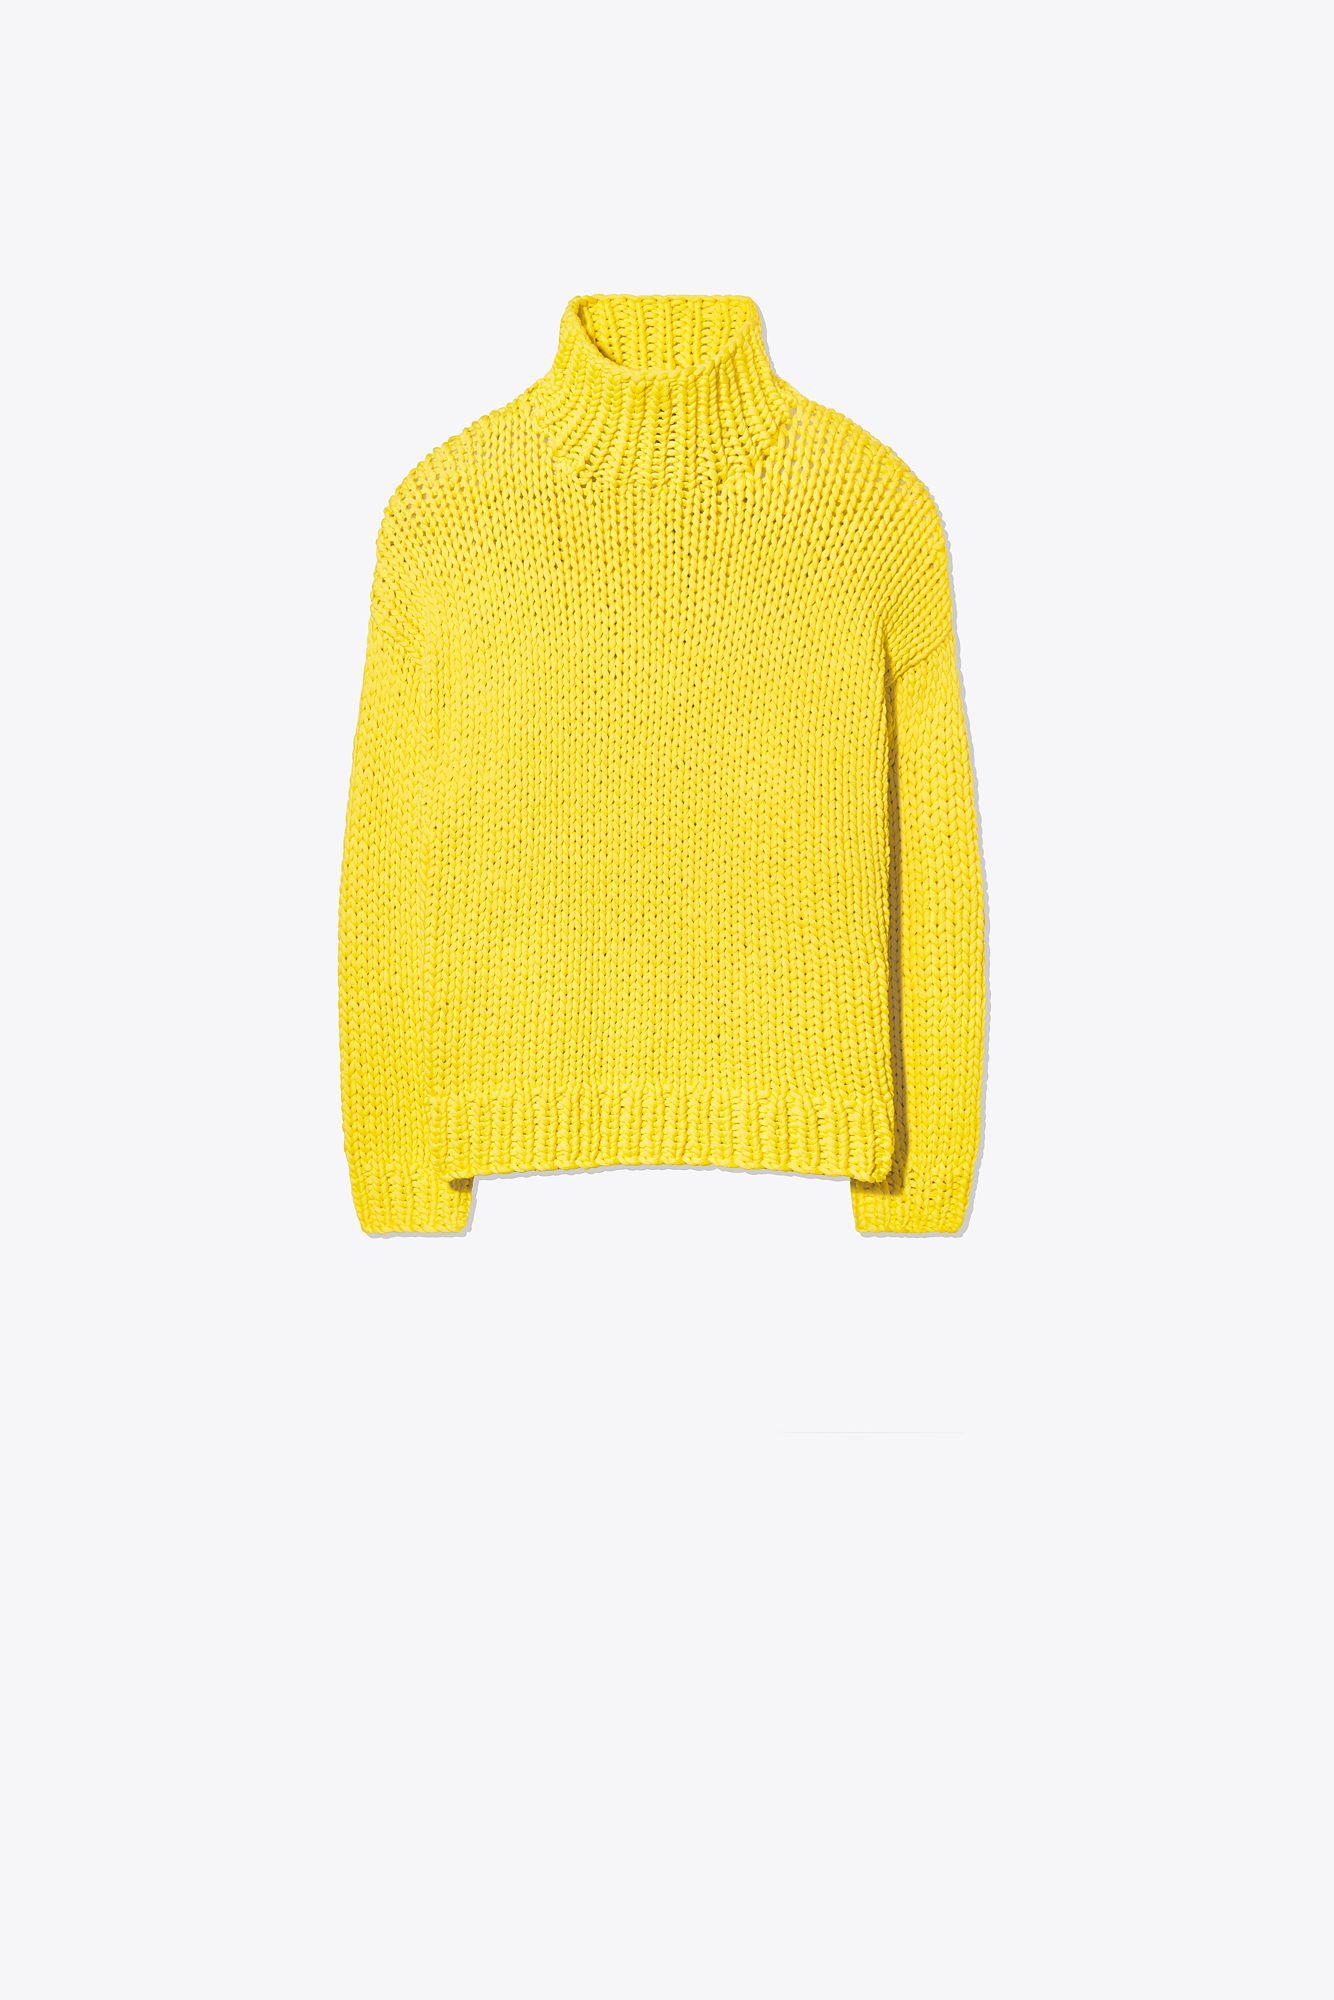 Tory Sport Hand-knit Sweater in Yellow | Lyst